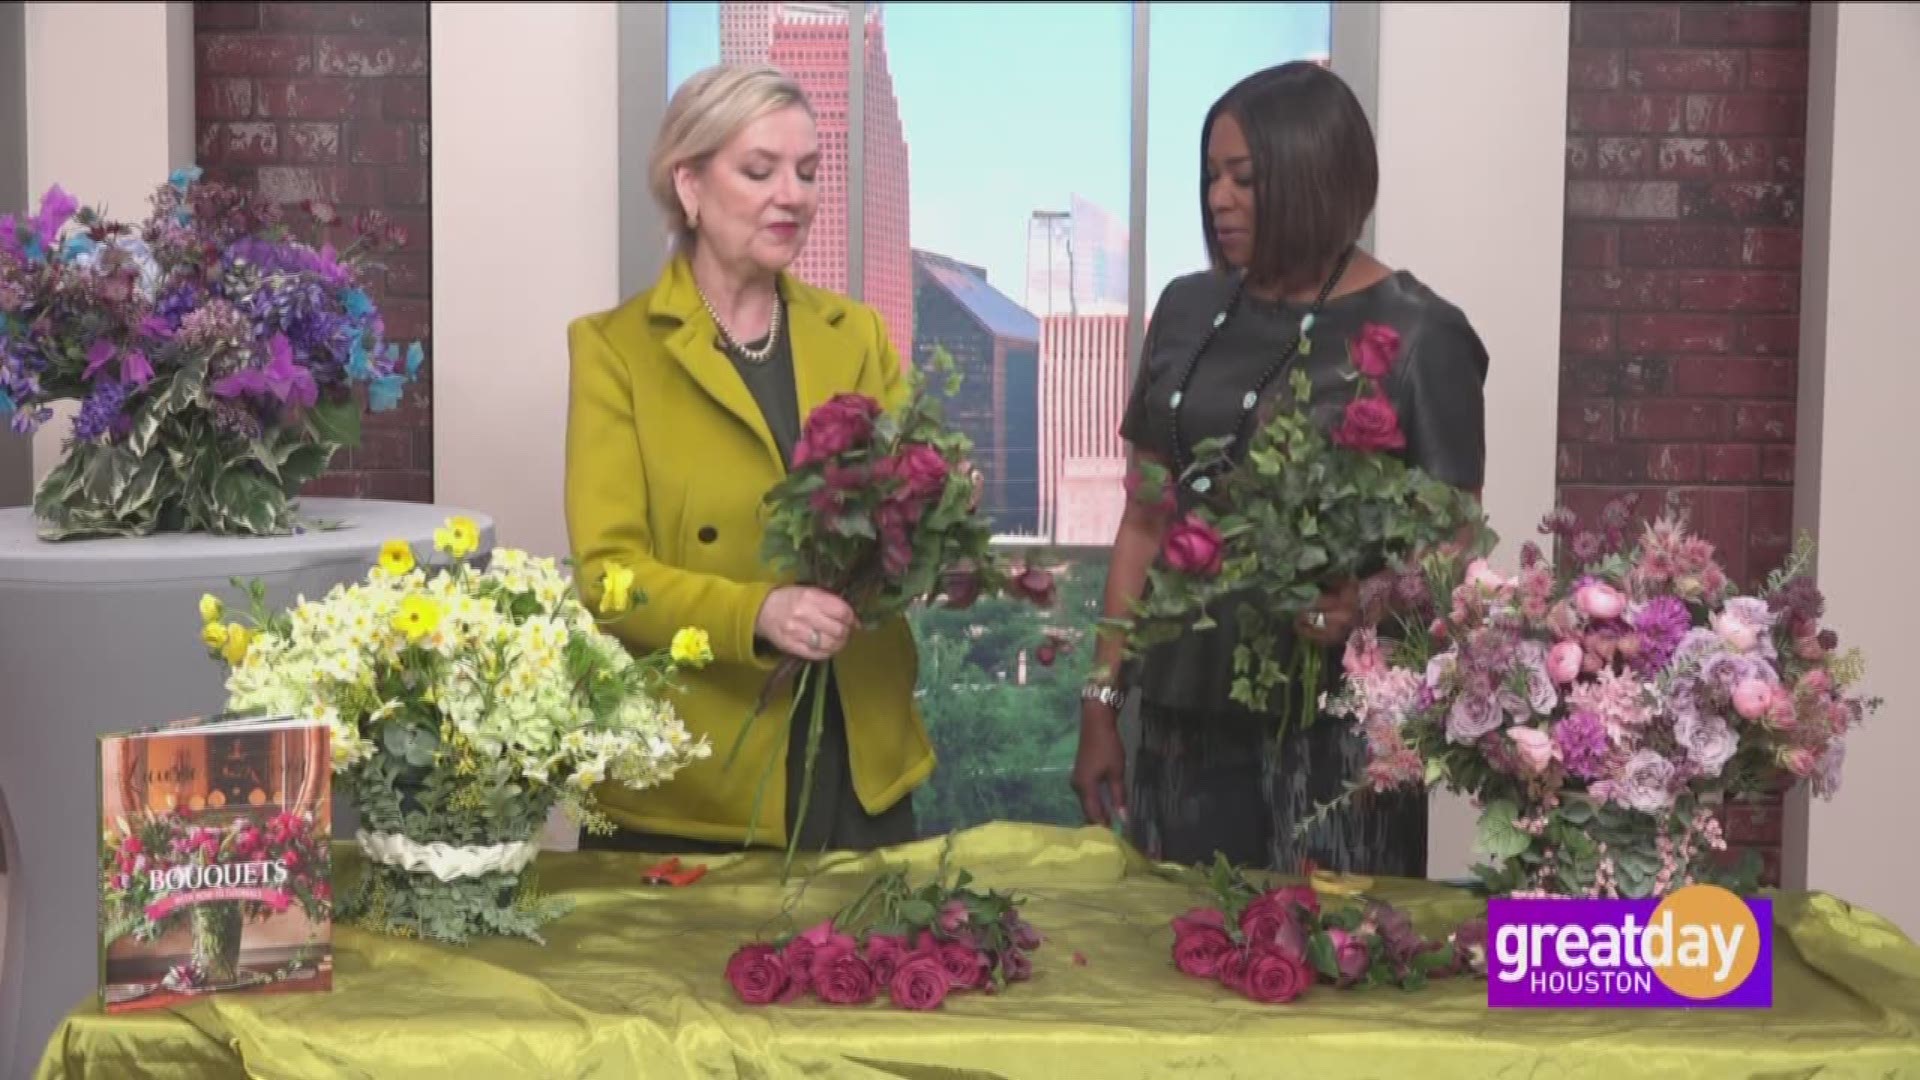 Laura Dowling brought magic and majesty through her floral designs to the White House.